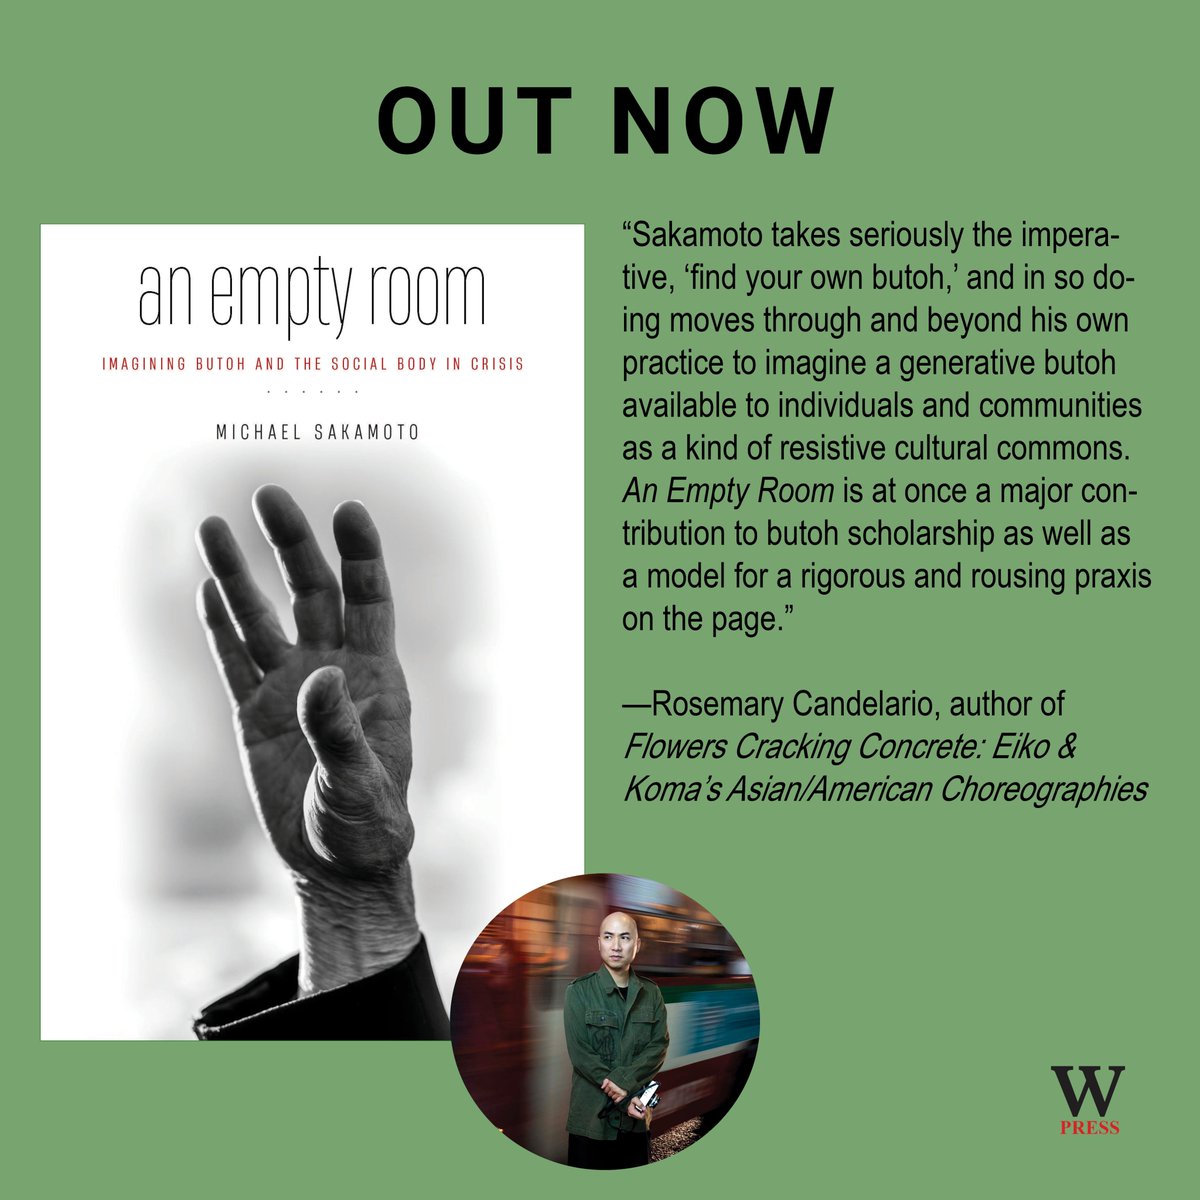 test Twitter Media - "An Empty Room: Imagining Butoh and the Social Body in Crisis" by Michael Sakamoto. Order today using discount code Q301 for 30% off.  #Butoh #Movement #ModernDance #Modernism #SocialBody #BodyPolitic https://t.co/Saes4X1wcW https://t.co/czlrj9AMDW